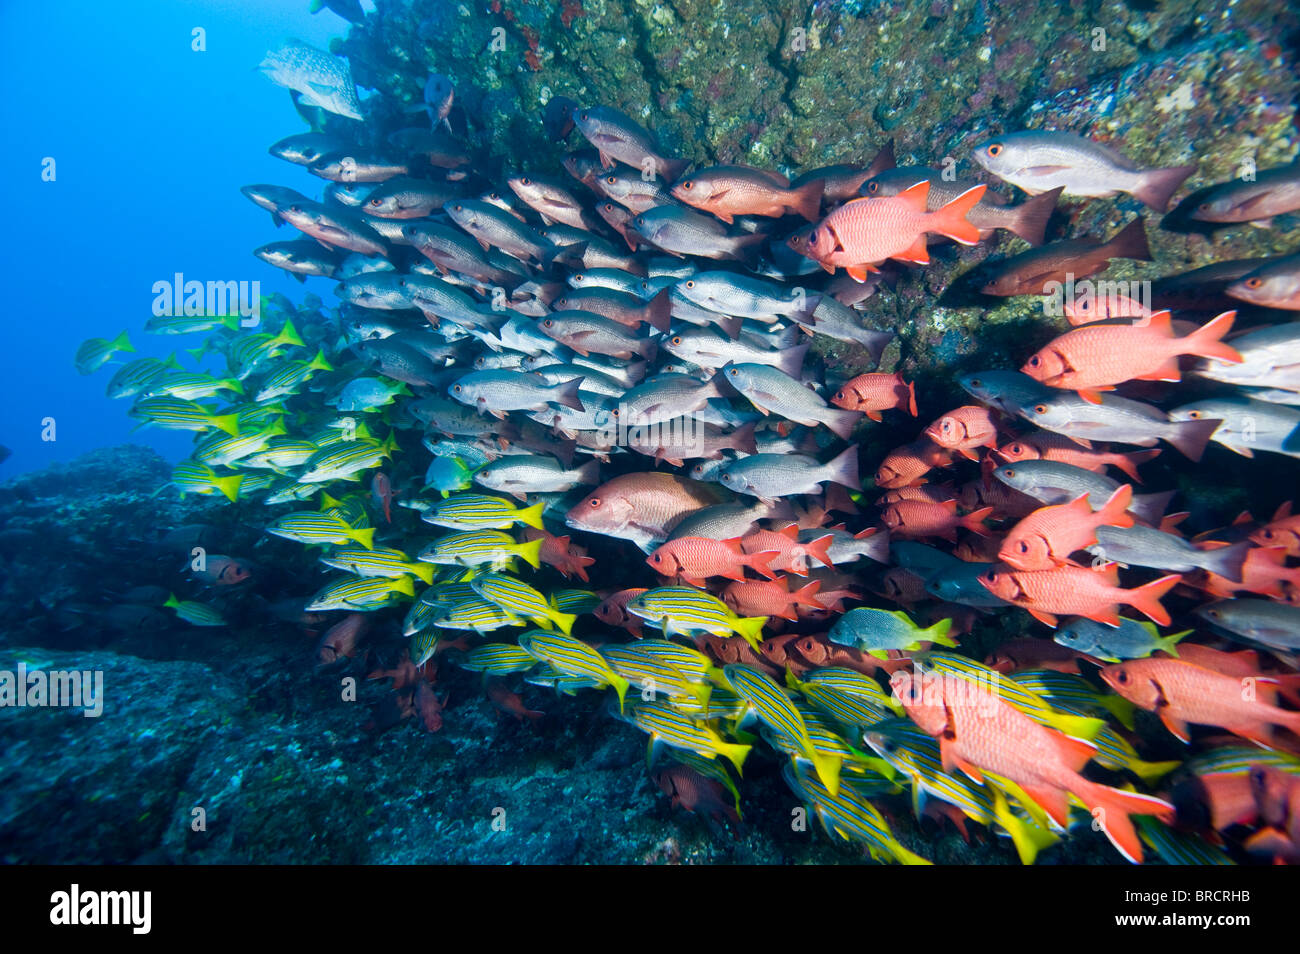 school of snappers , Cocos Island, East Pacific Ocean Stock Photo